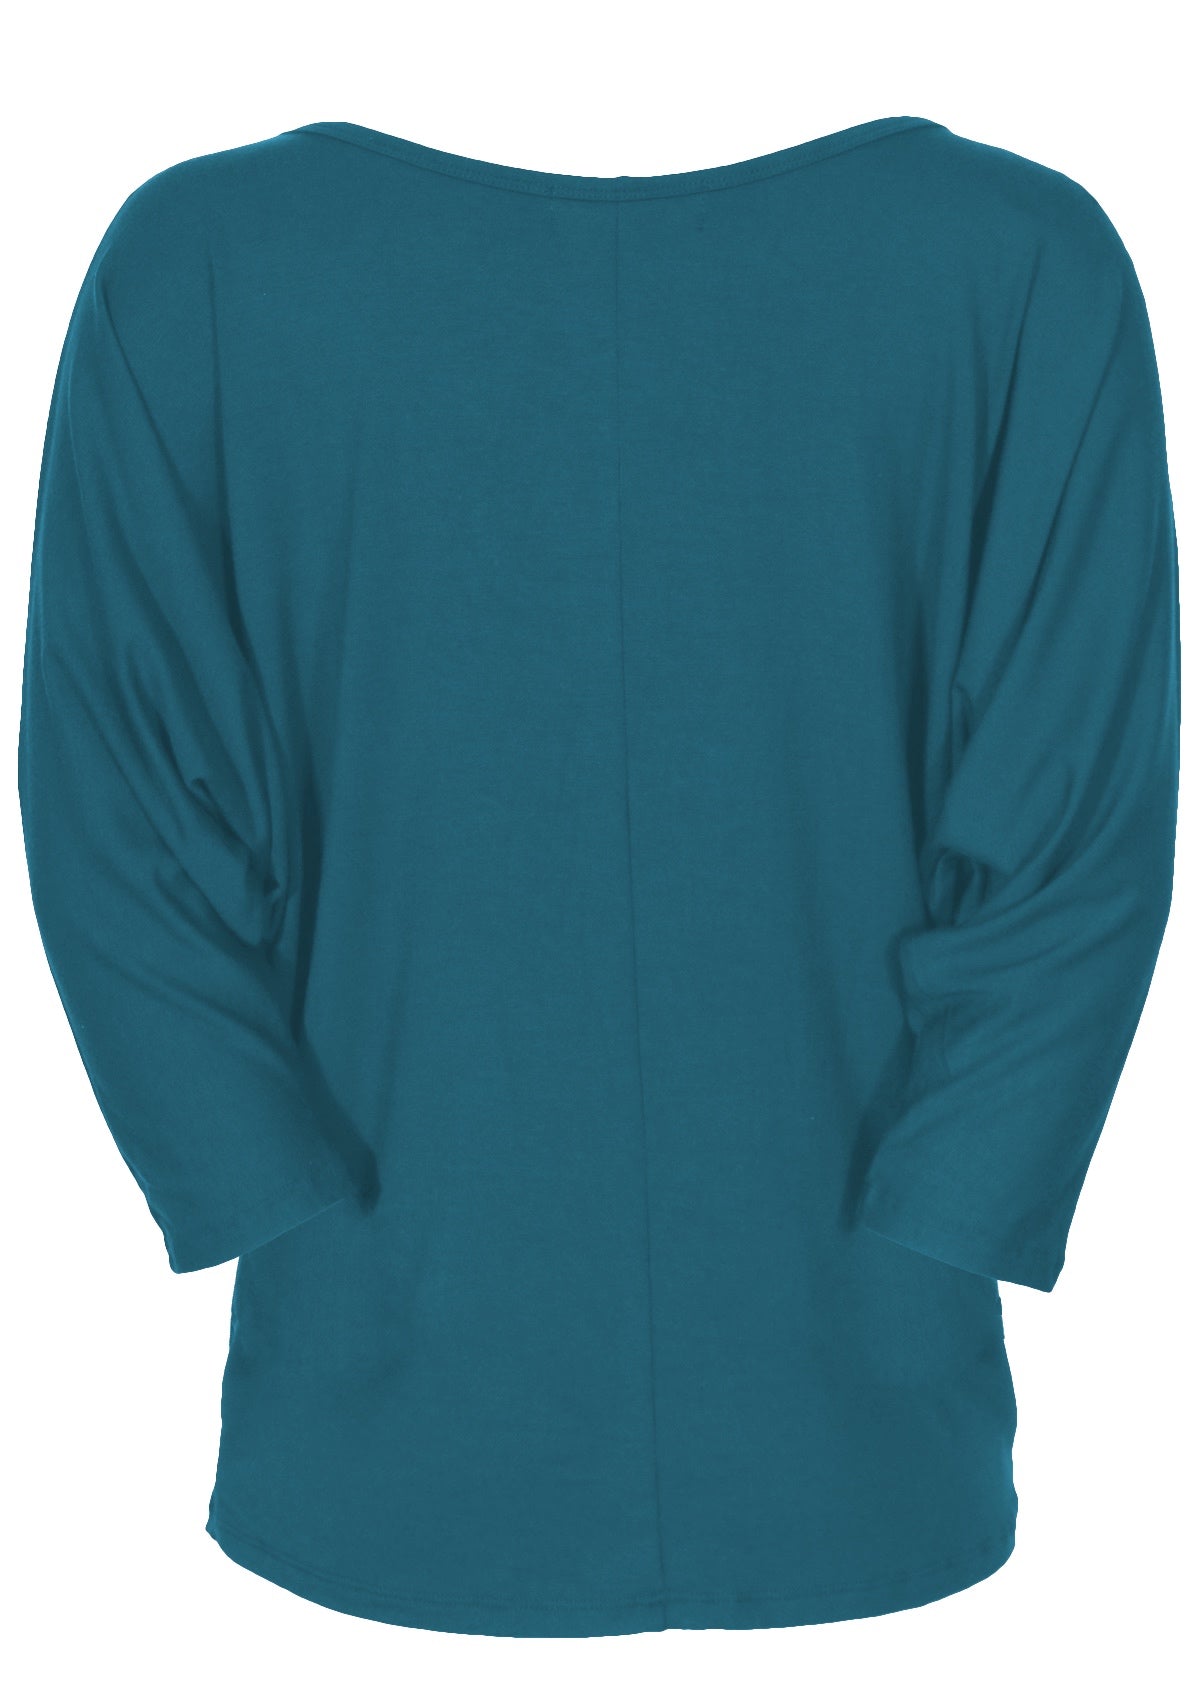 back view batwing top teal